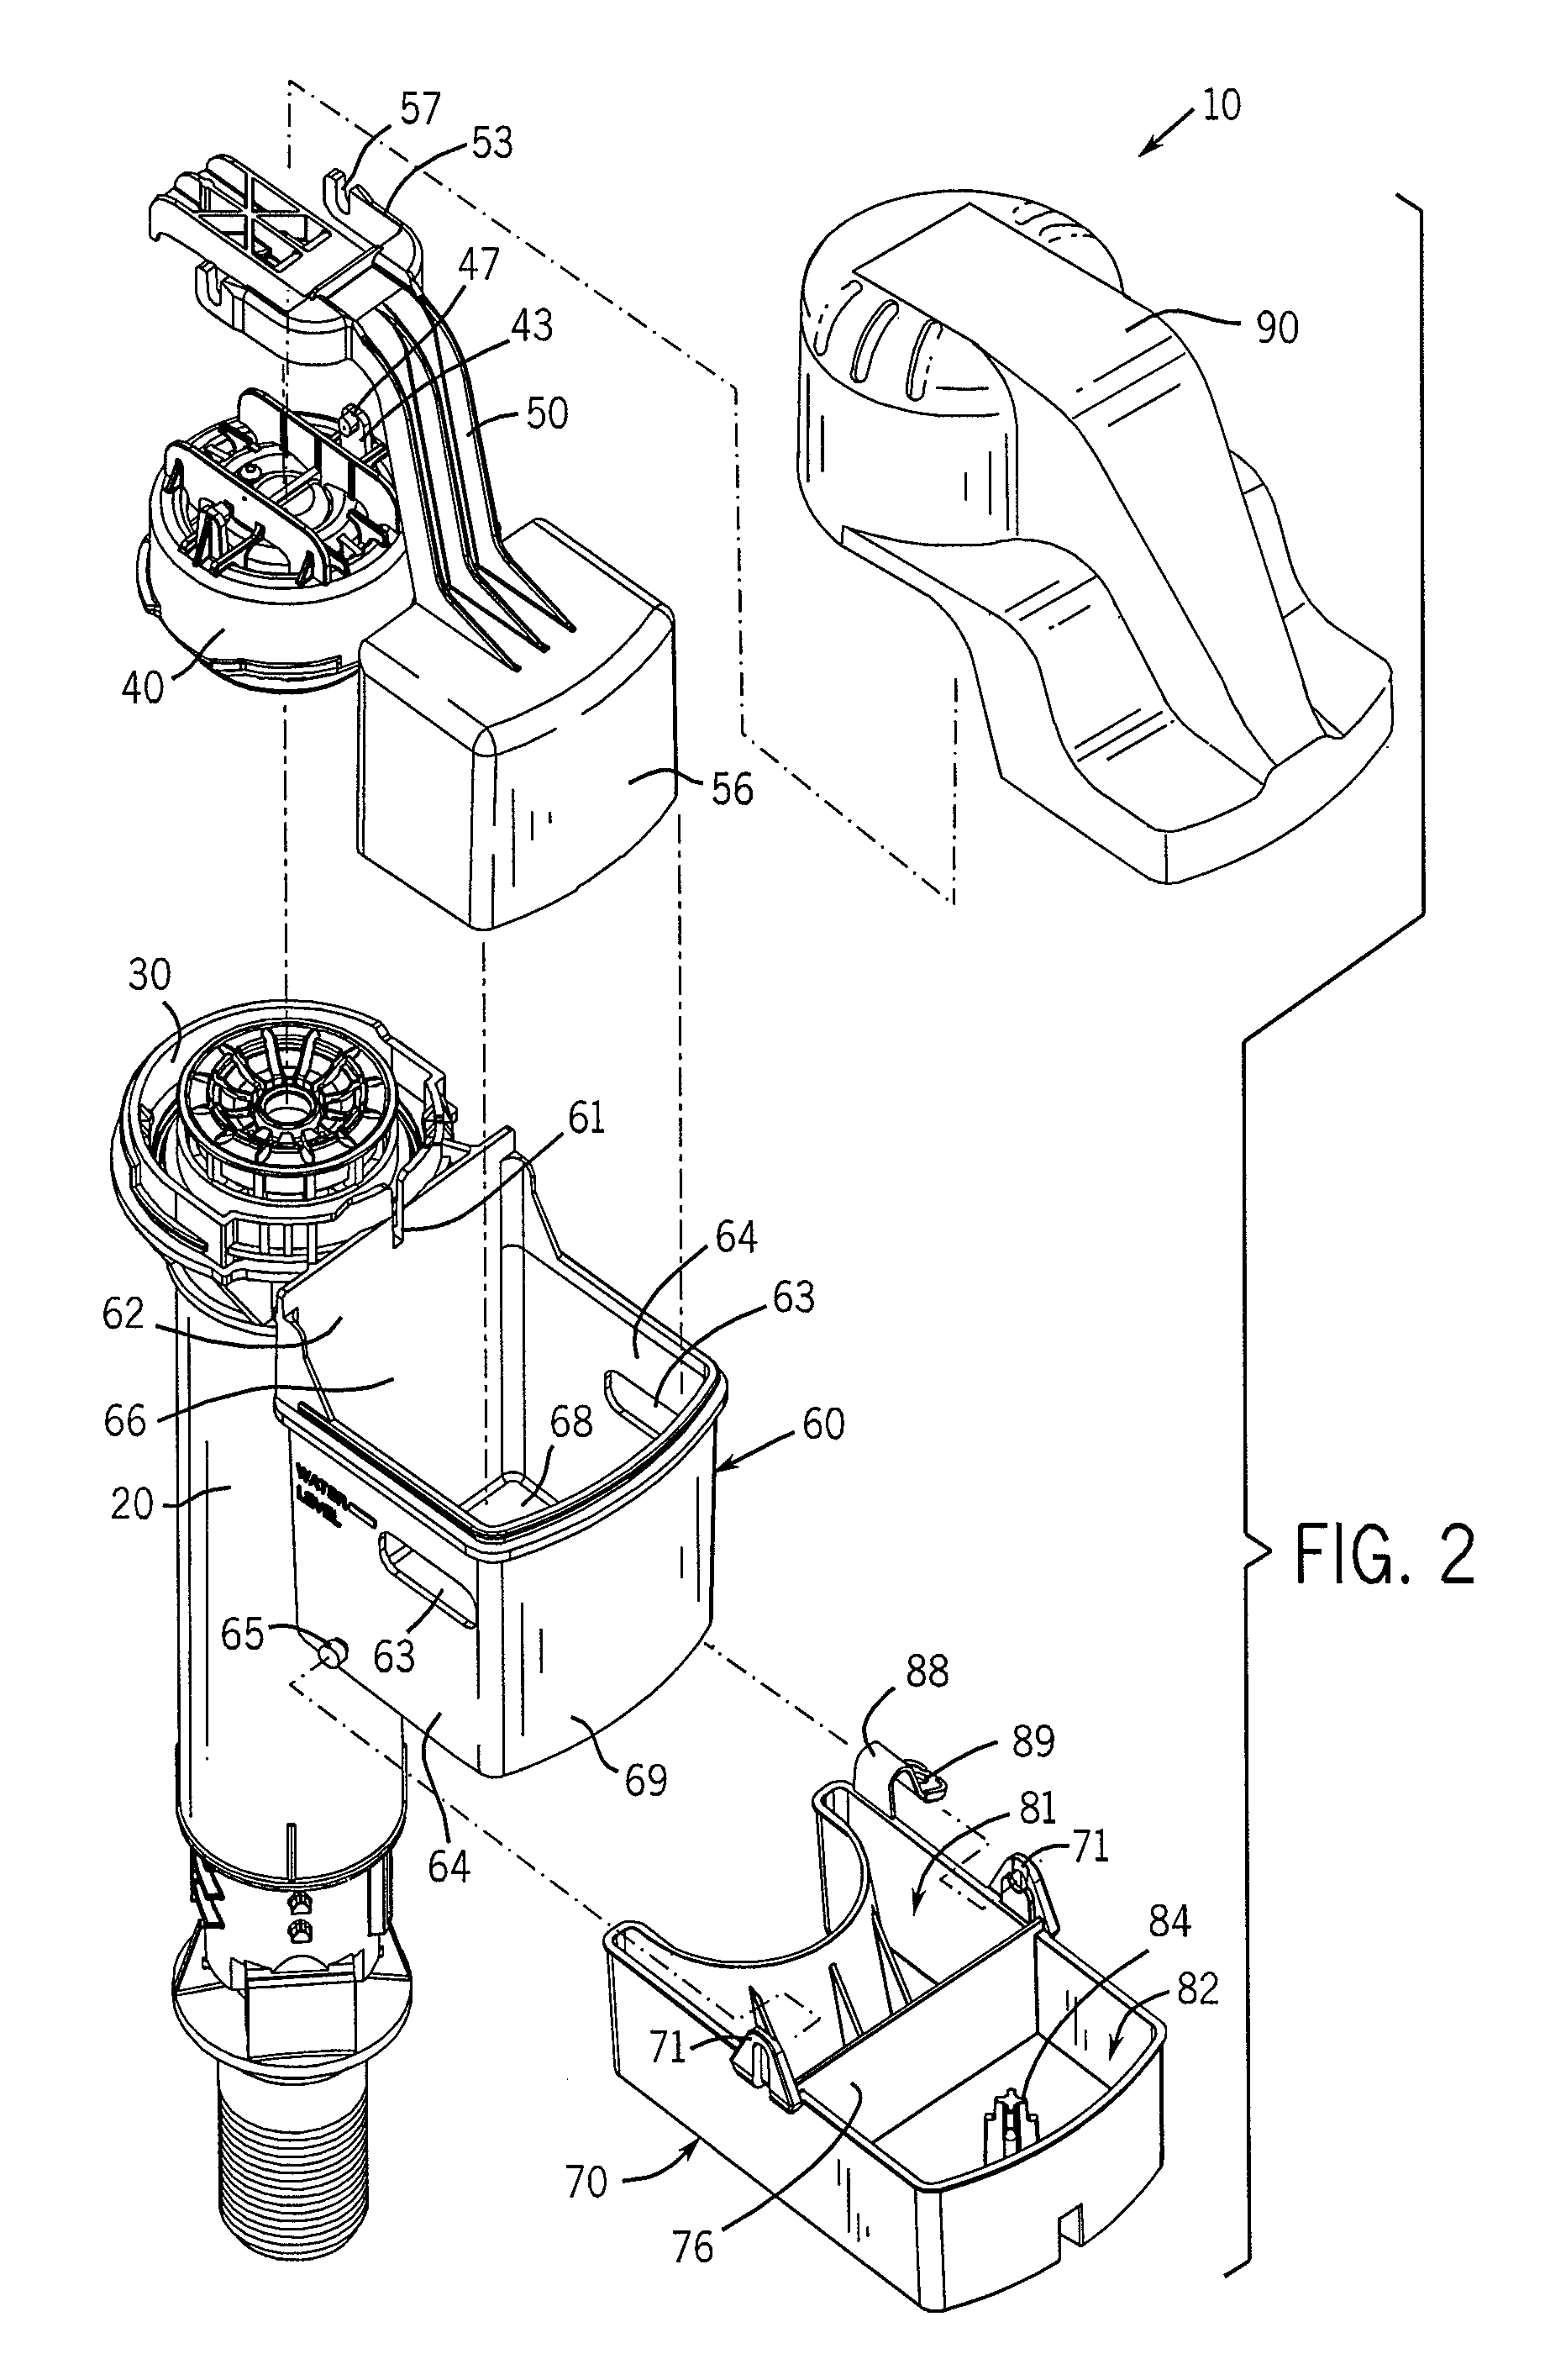 Water saver fill valve and assembly